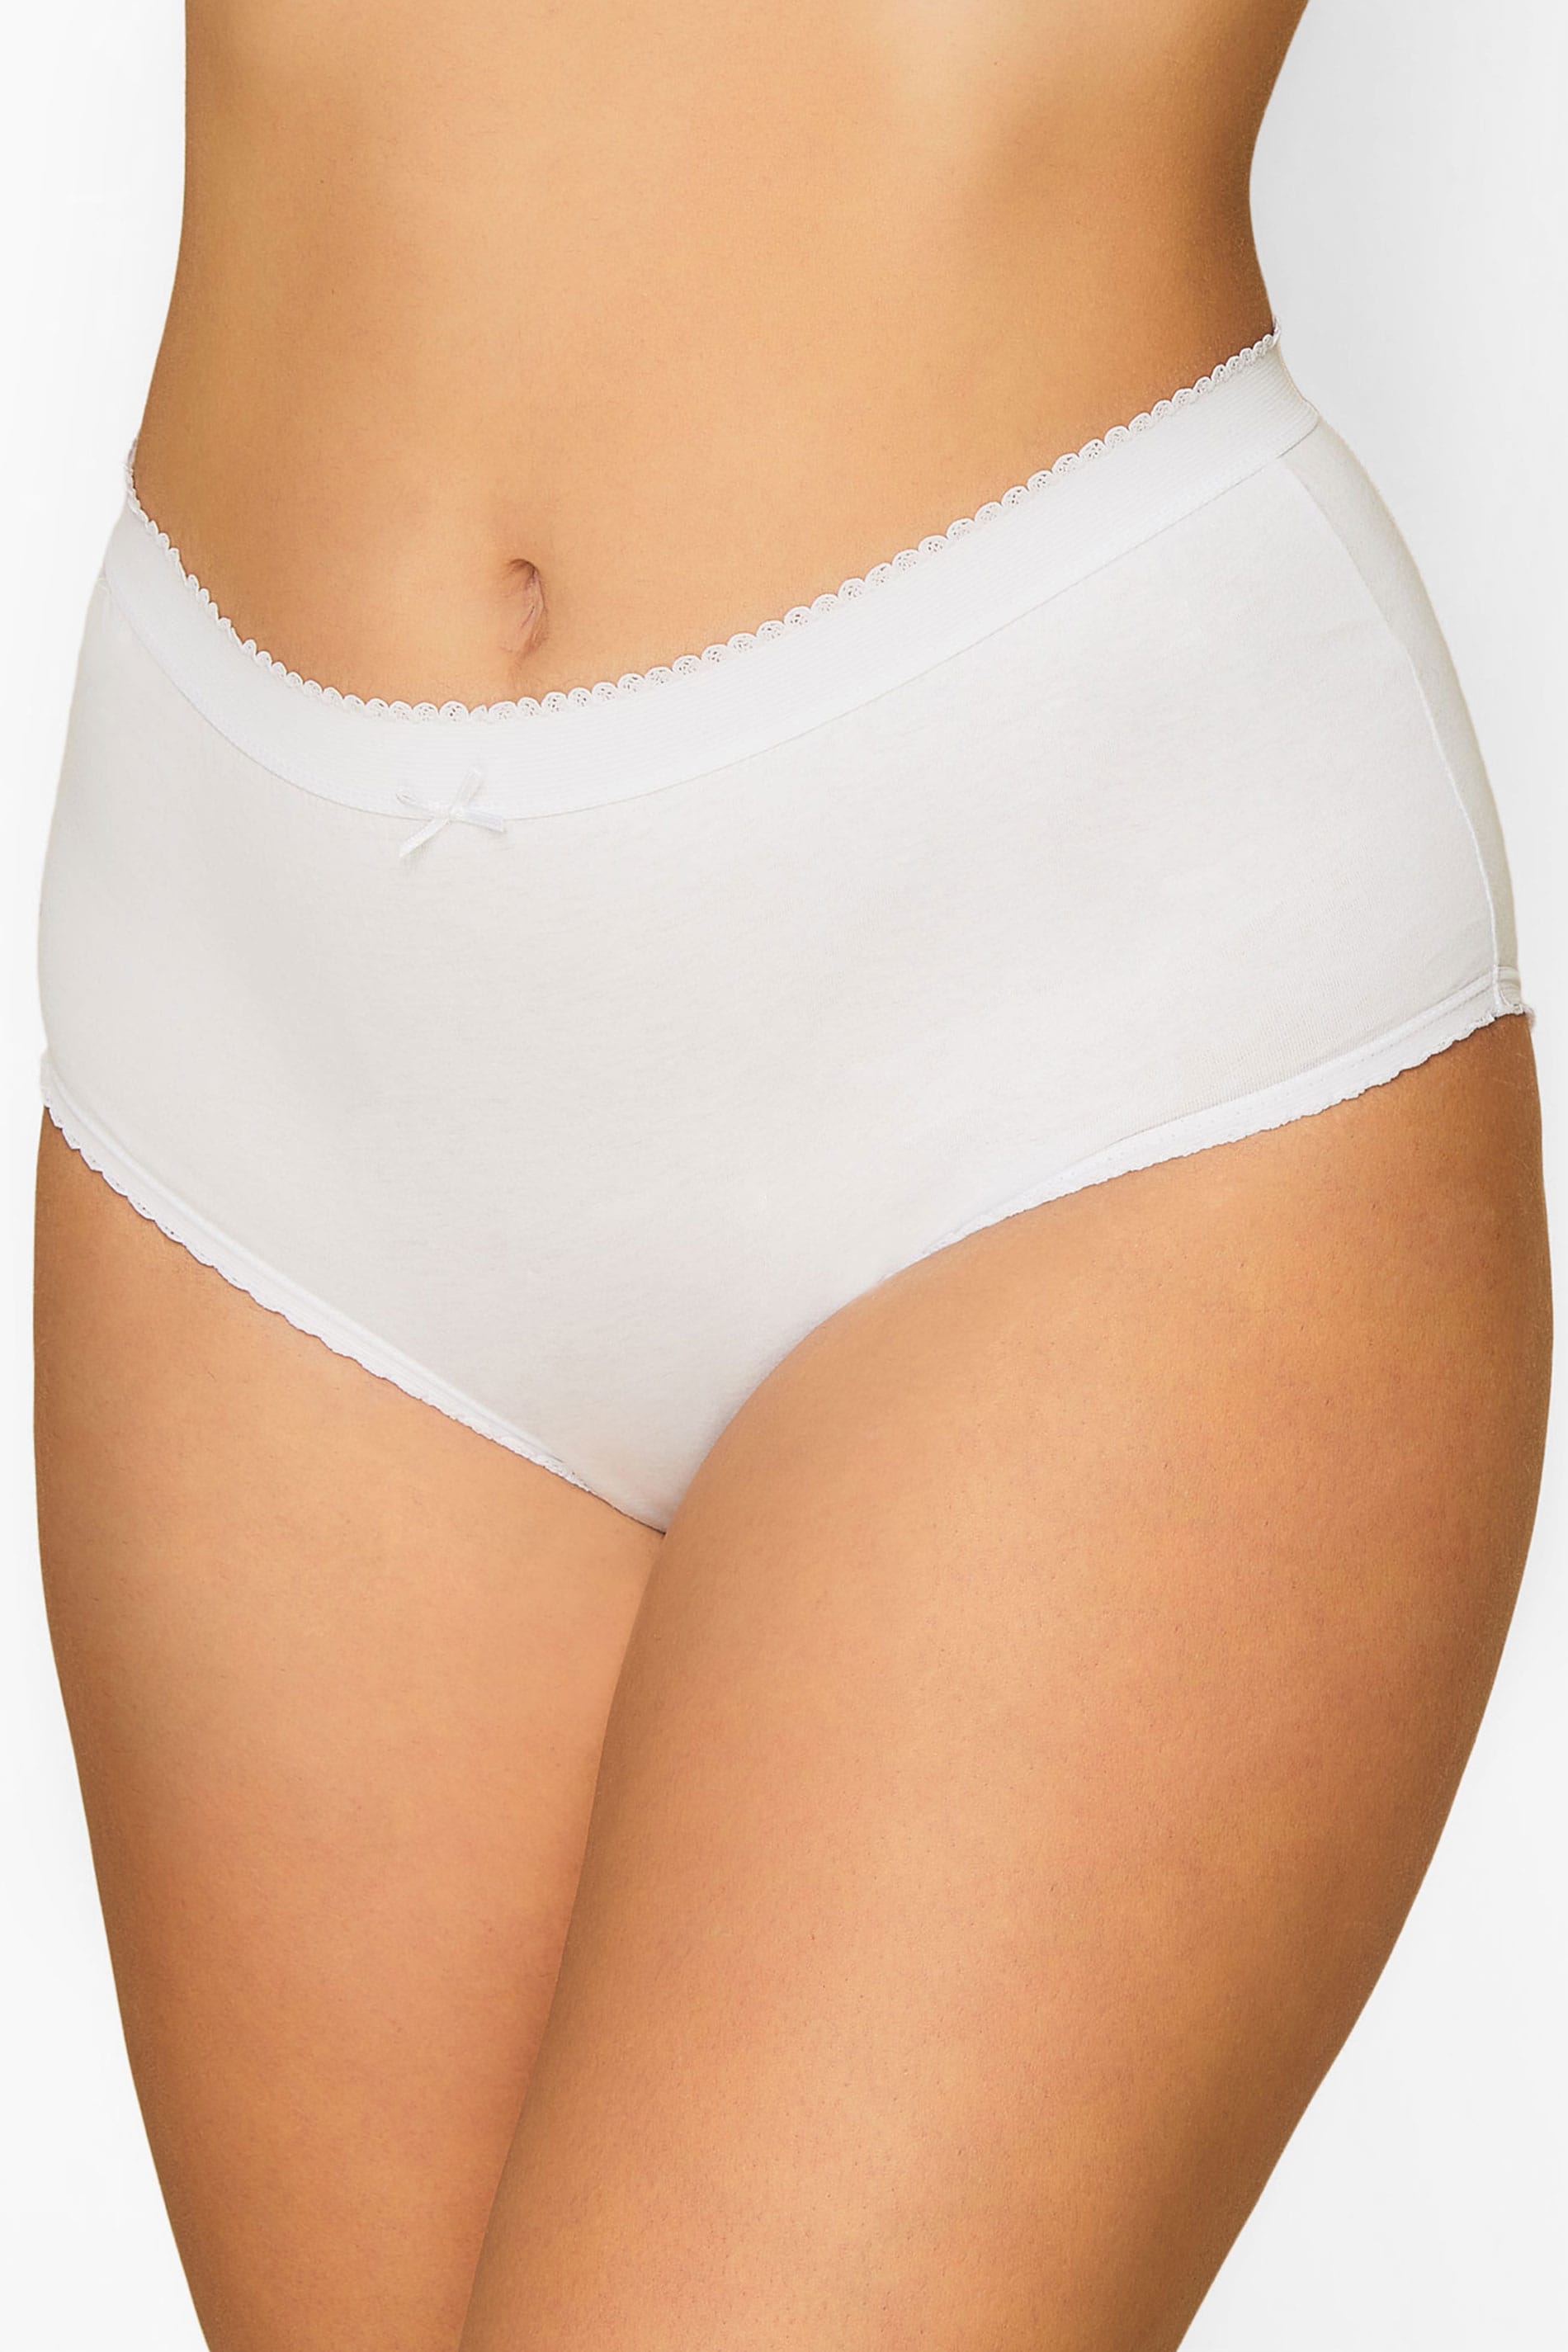 5 PACK Curve White Cotton High Waisted Full Briefs | Yours Clothing 1